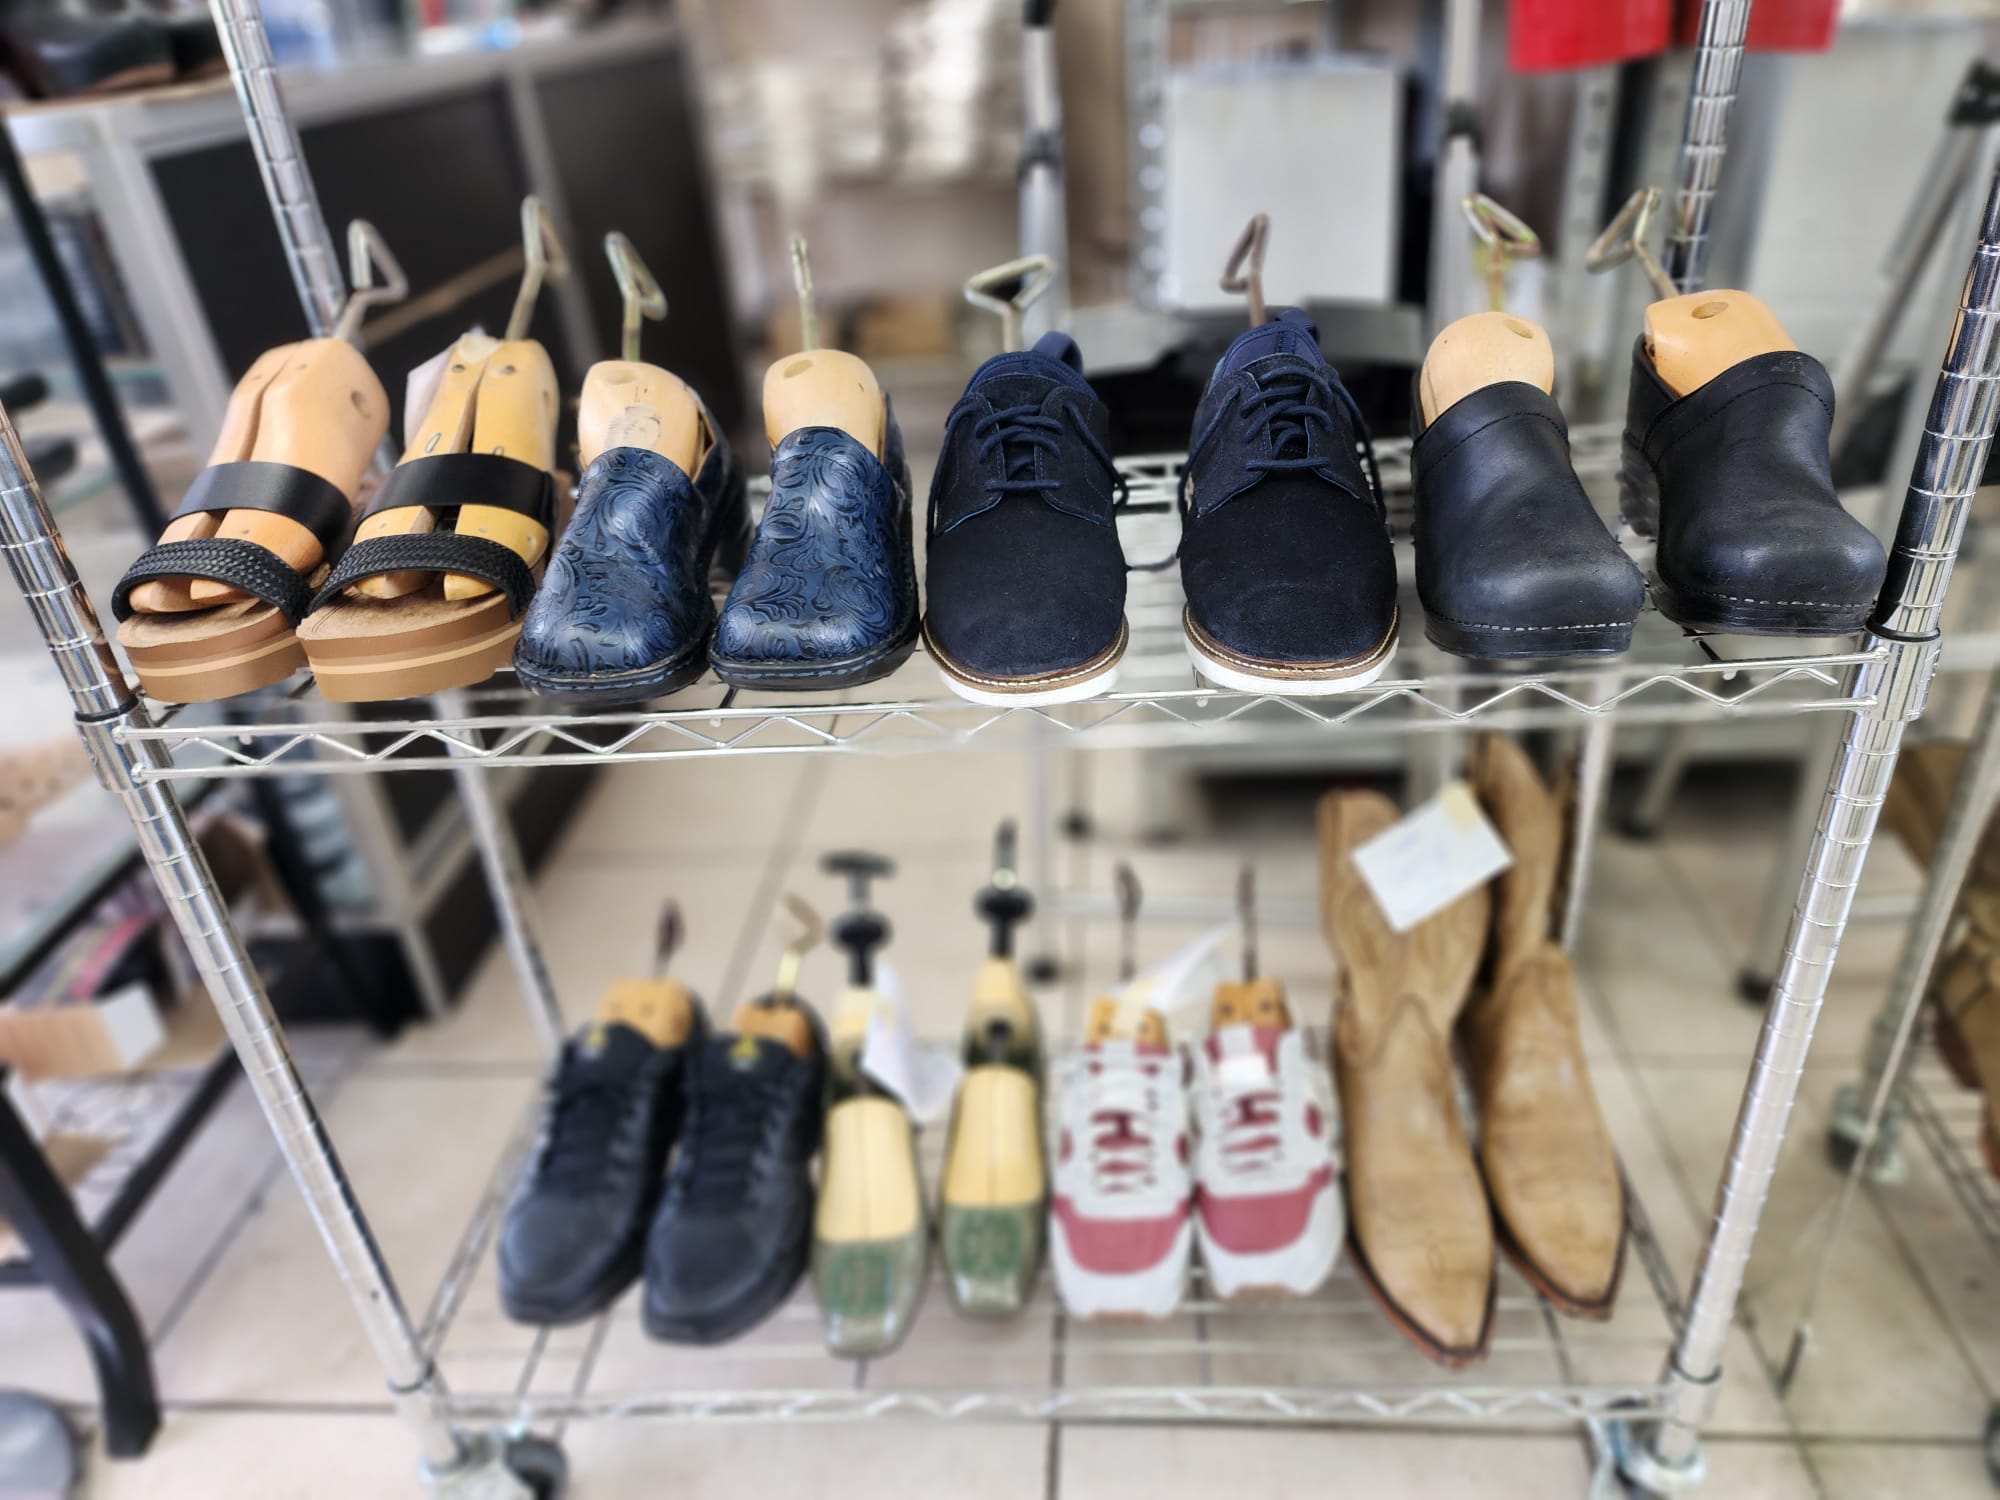 Boots (Cowboy, Riding, and Work)|Cobbler Tailor Shoe Repair